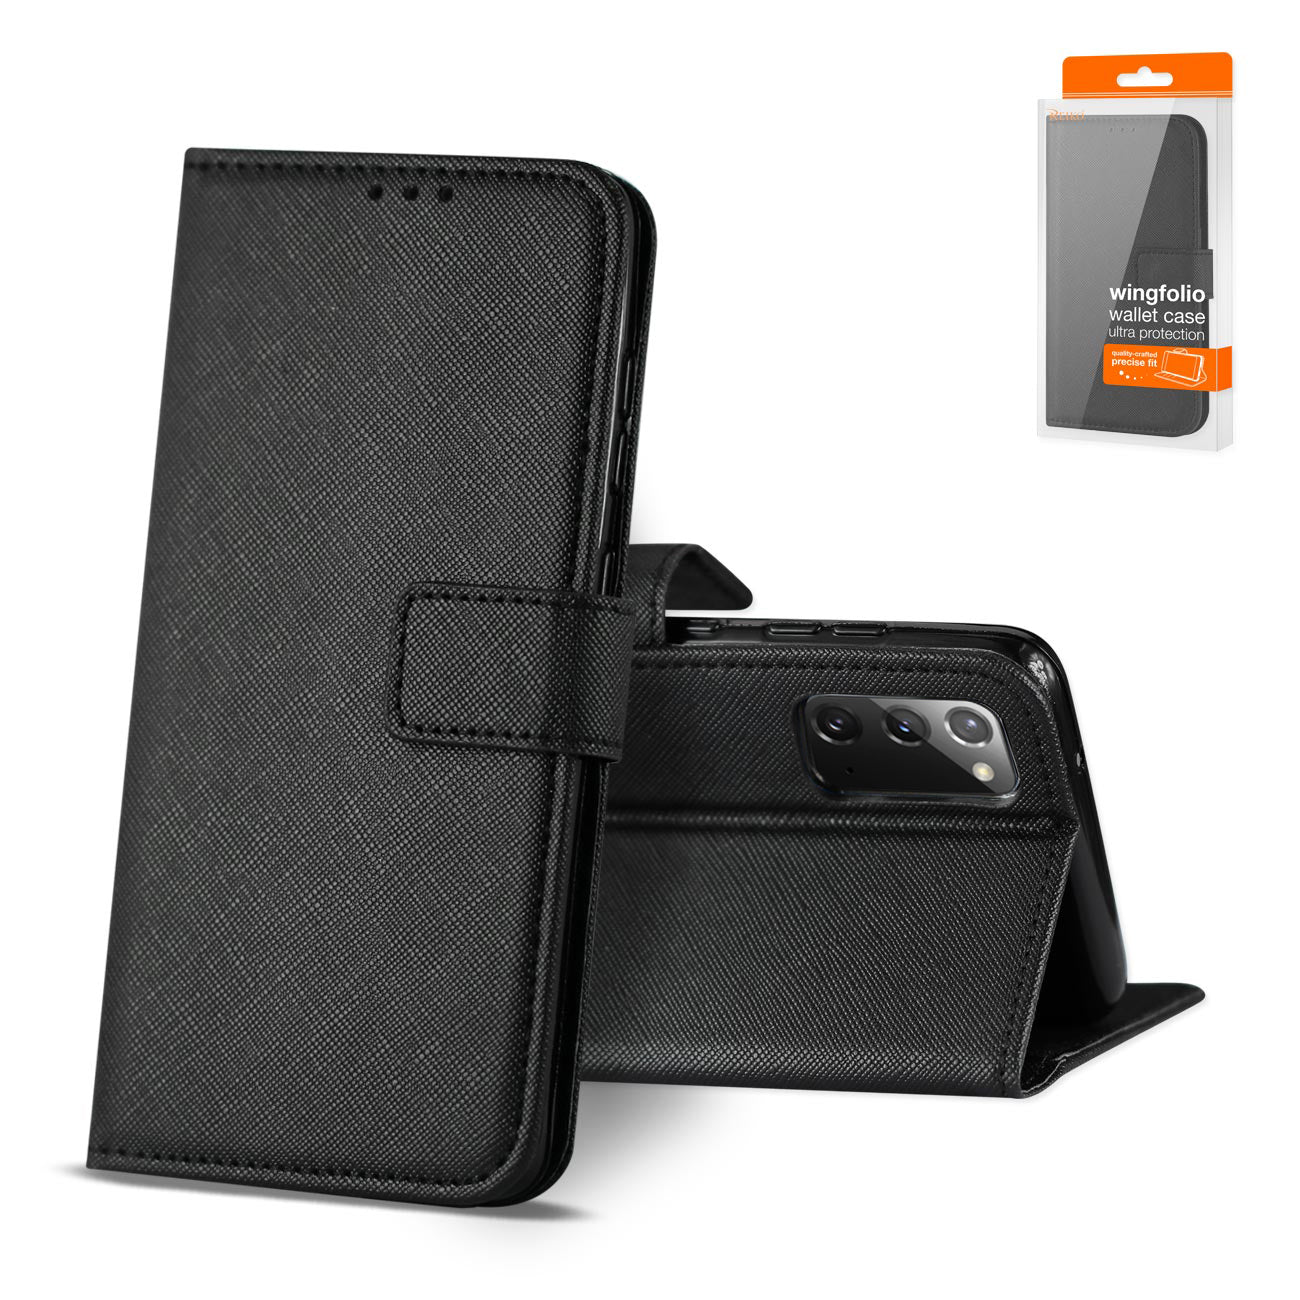 Case Slim Stand With Card Slots Samsung Galaxy Note 20 Black Color